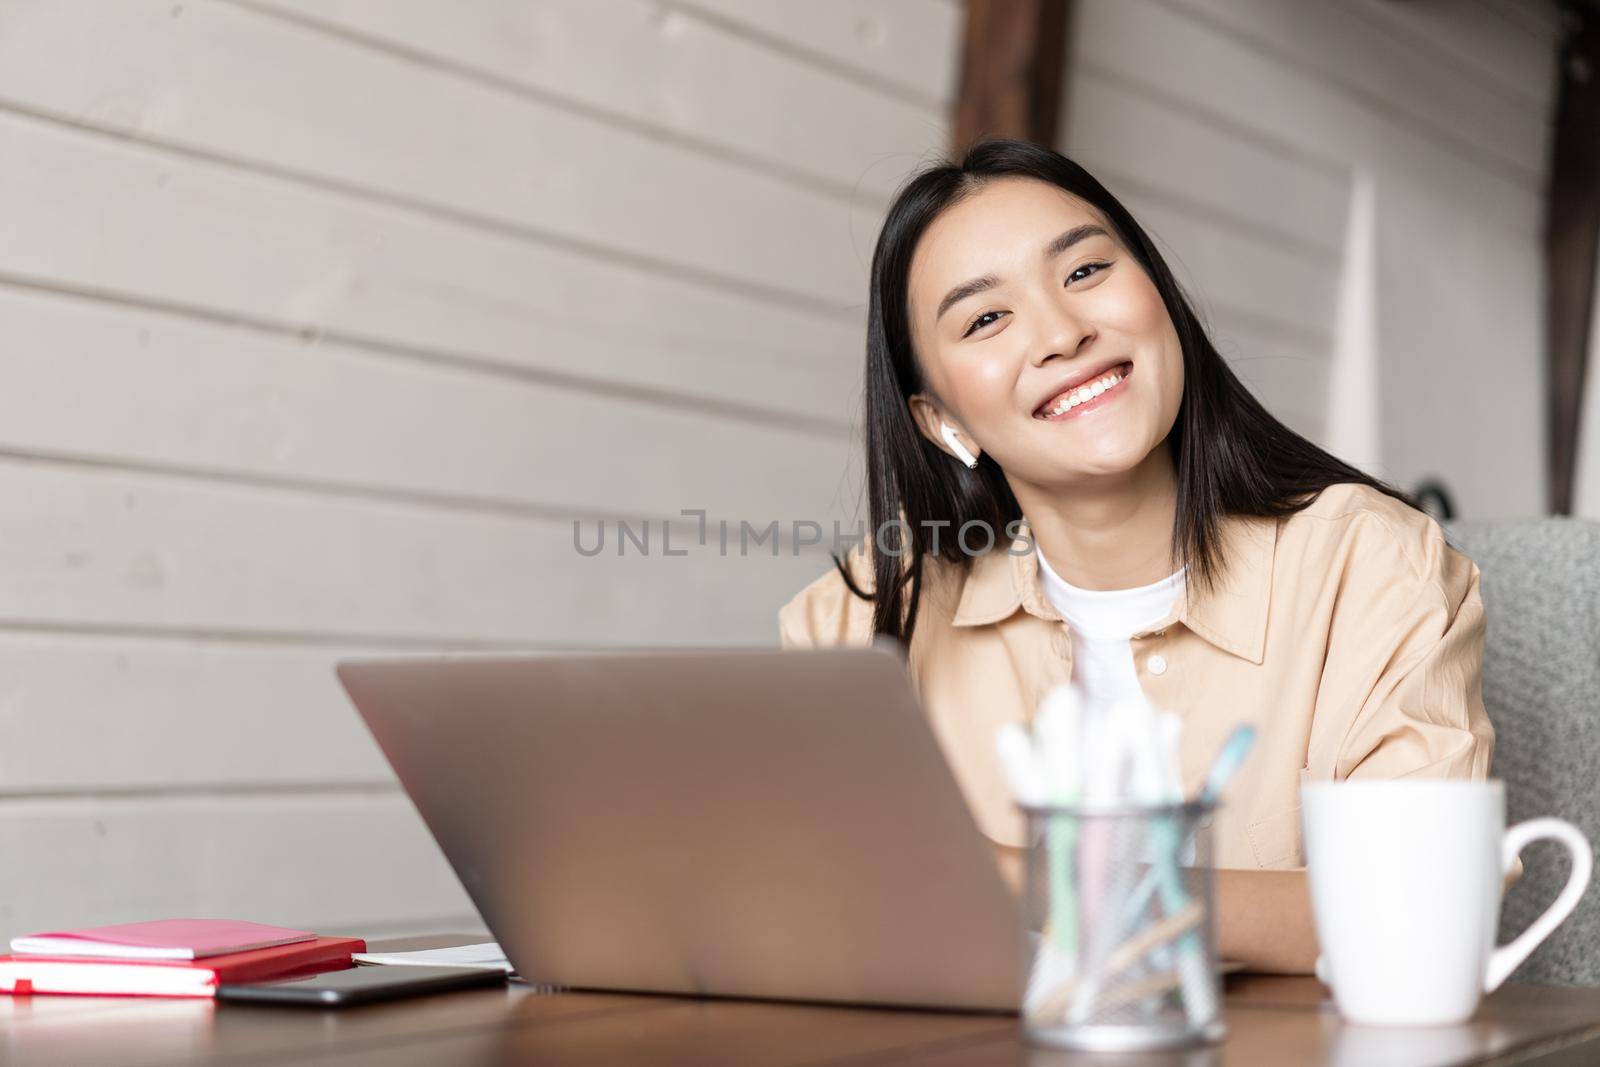 Cute asian girl using laptop, student studying or having online lecure, e-learning and distance education concept.